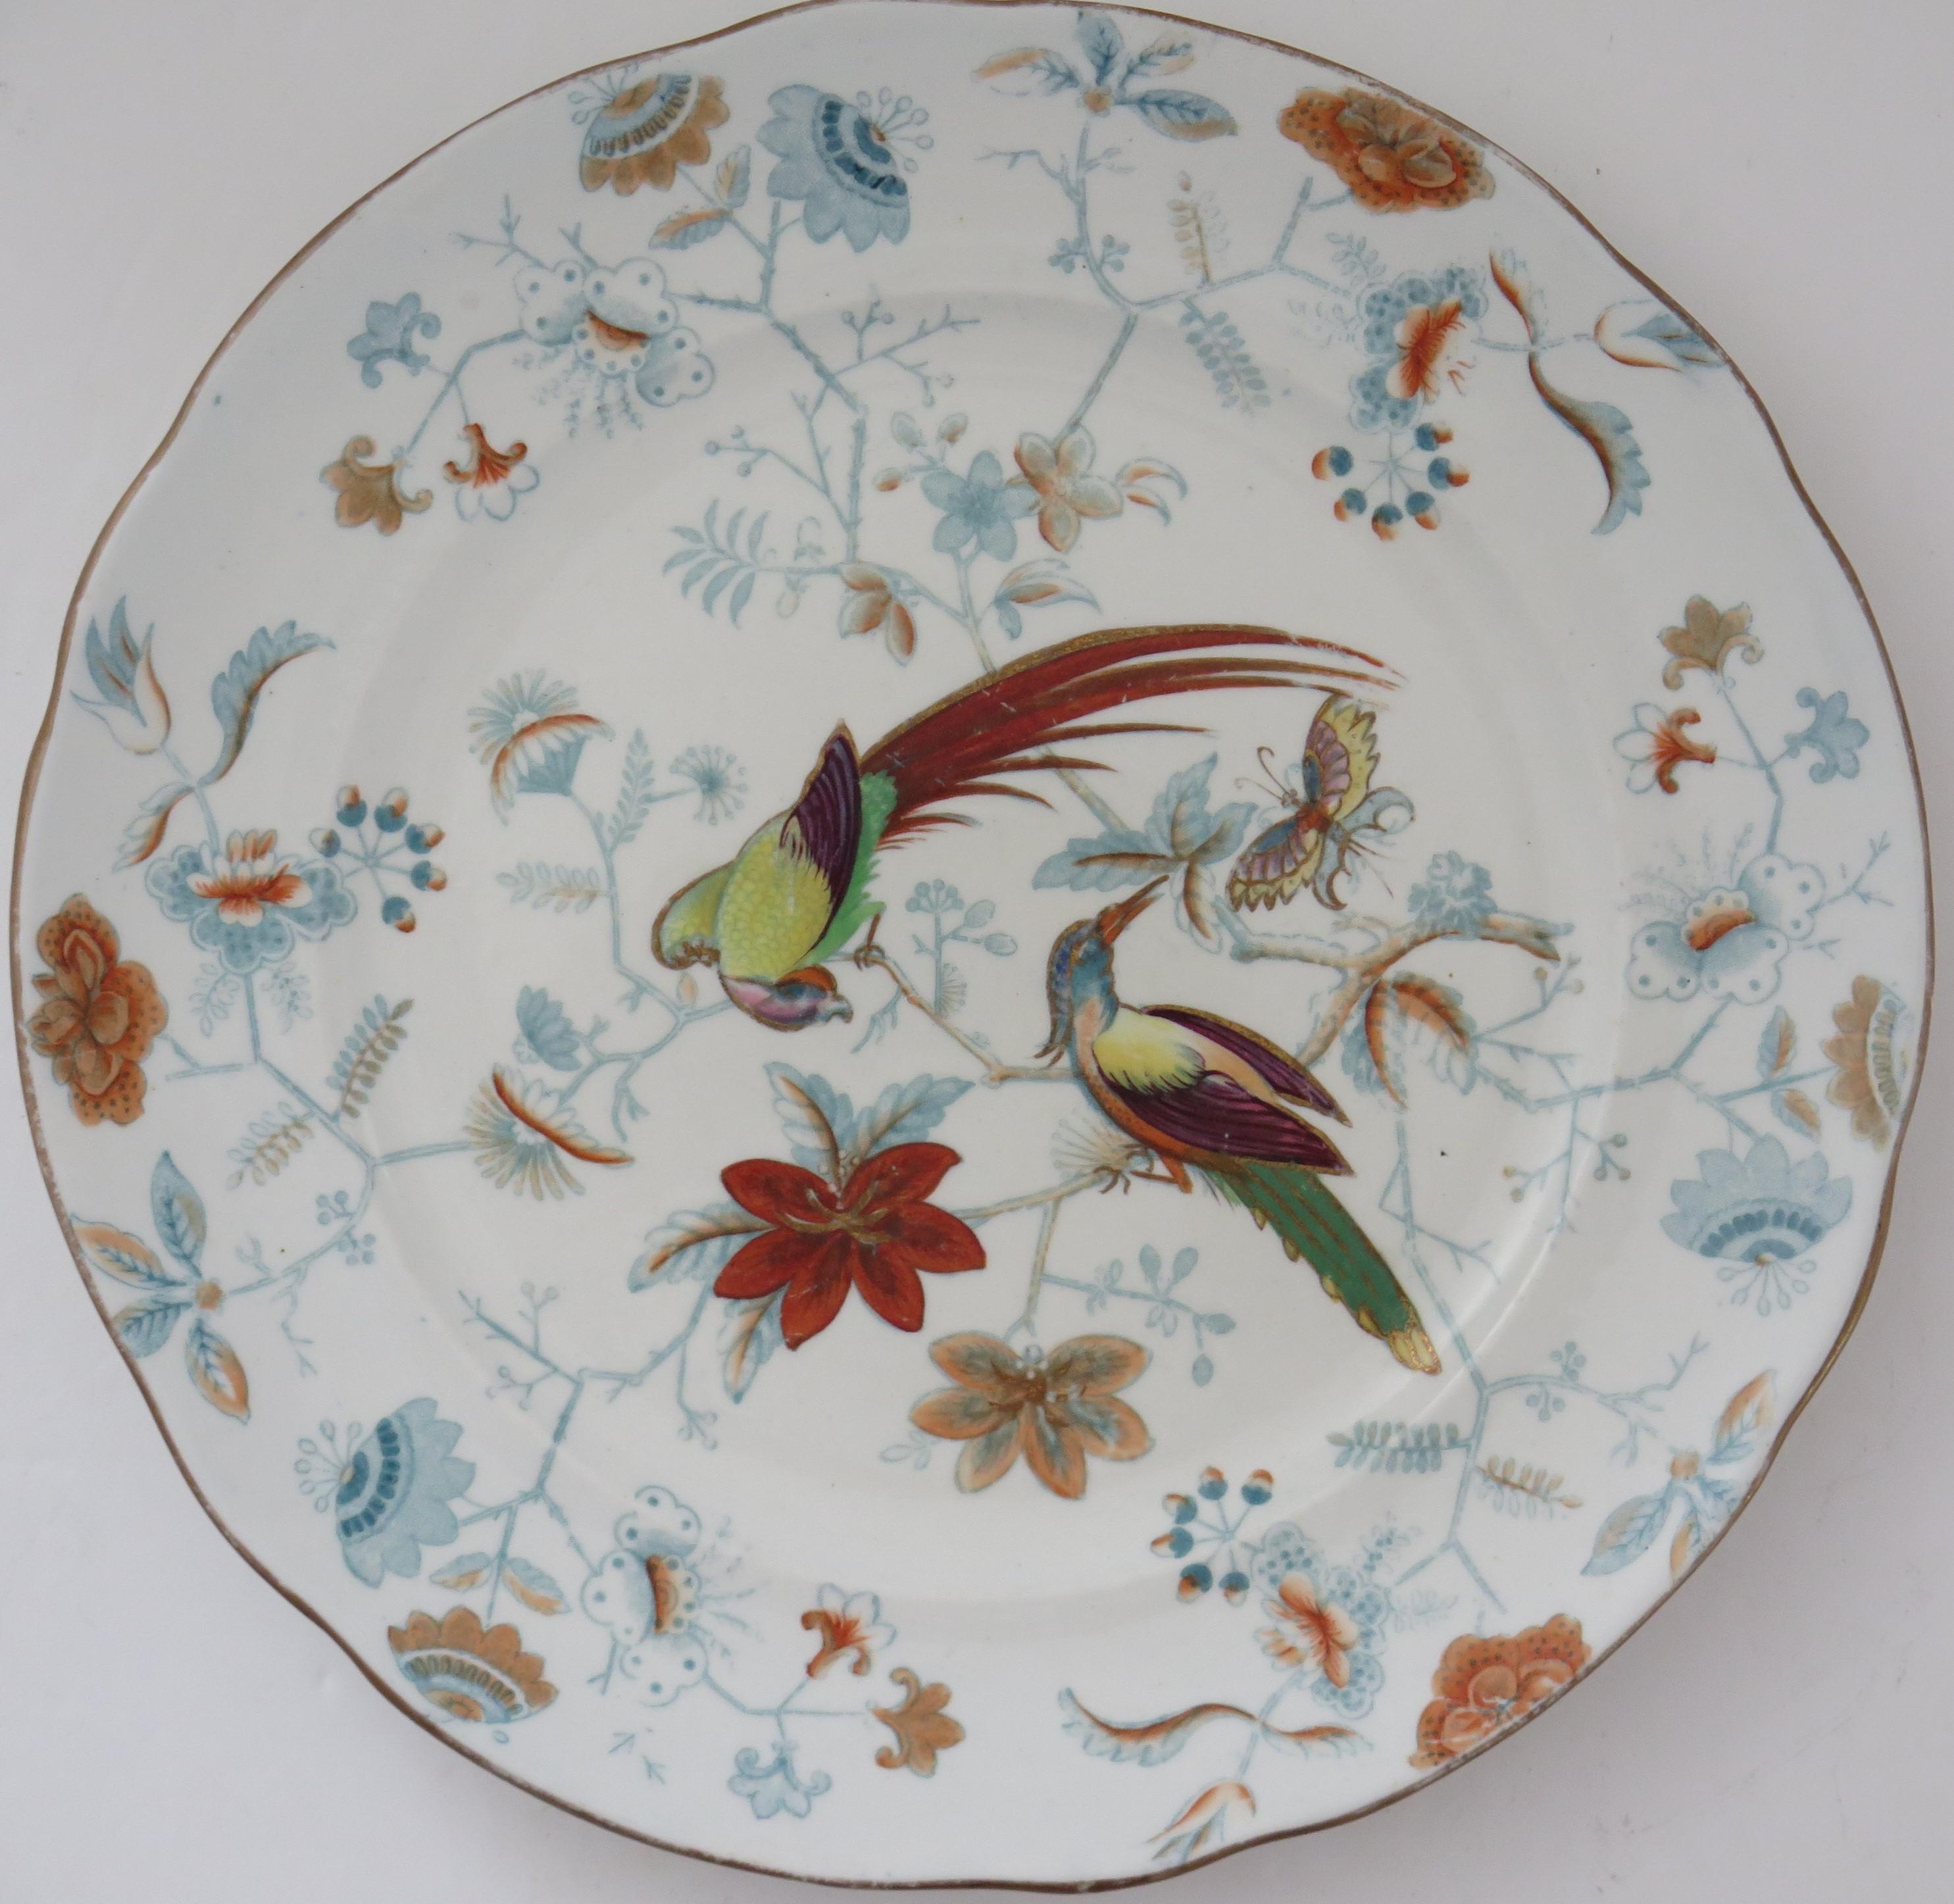 This is a very good, late Georgian Ironstone Desert plate decorated in a rare pattern No.85, manufactured by the English Davenport factory, which was situated in Longport, Staffordshire, England and dating to Circa 1815.

The plate is well potted